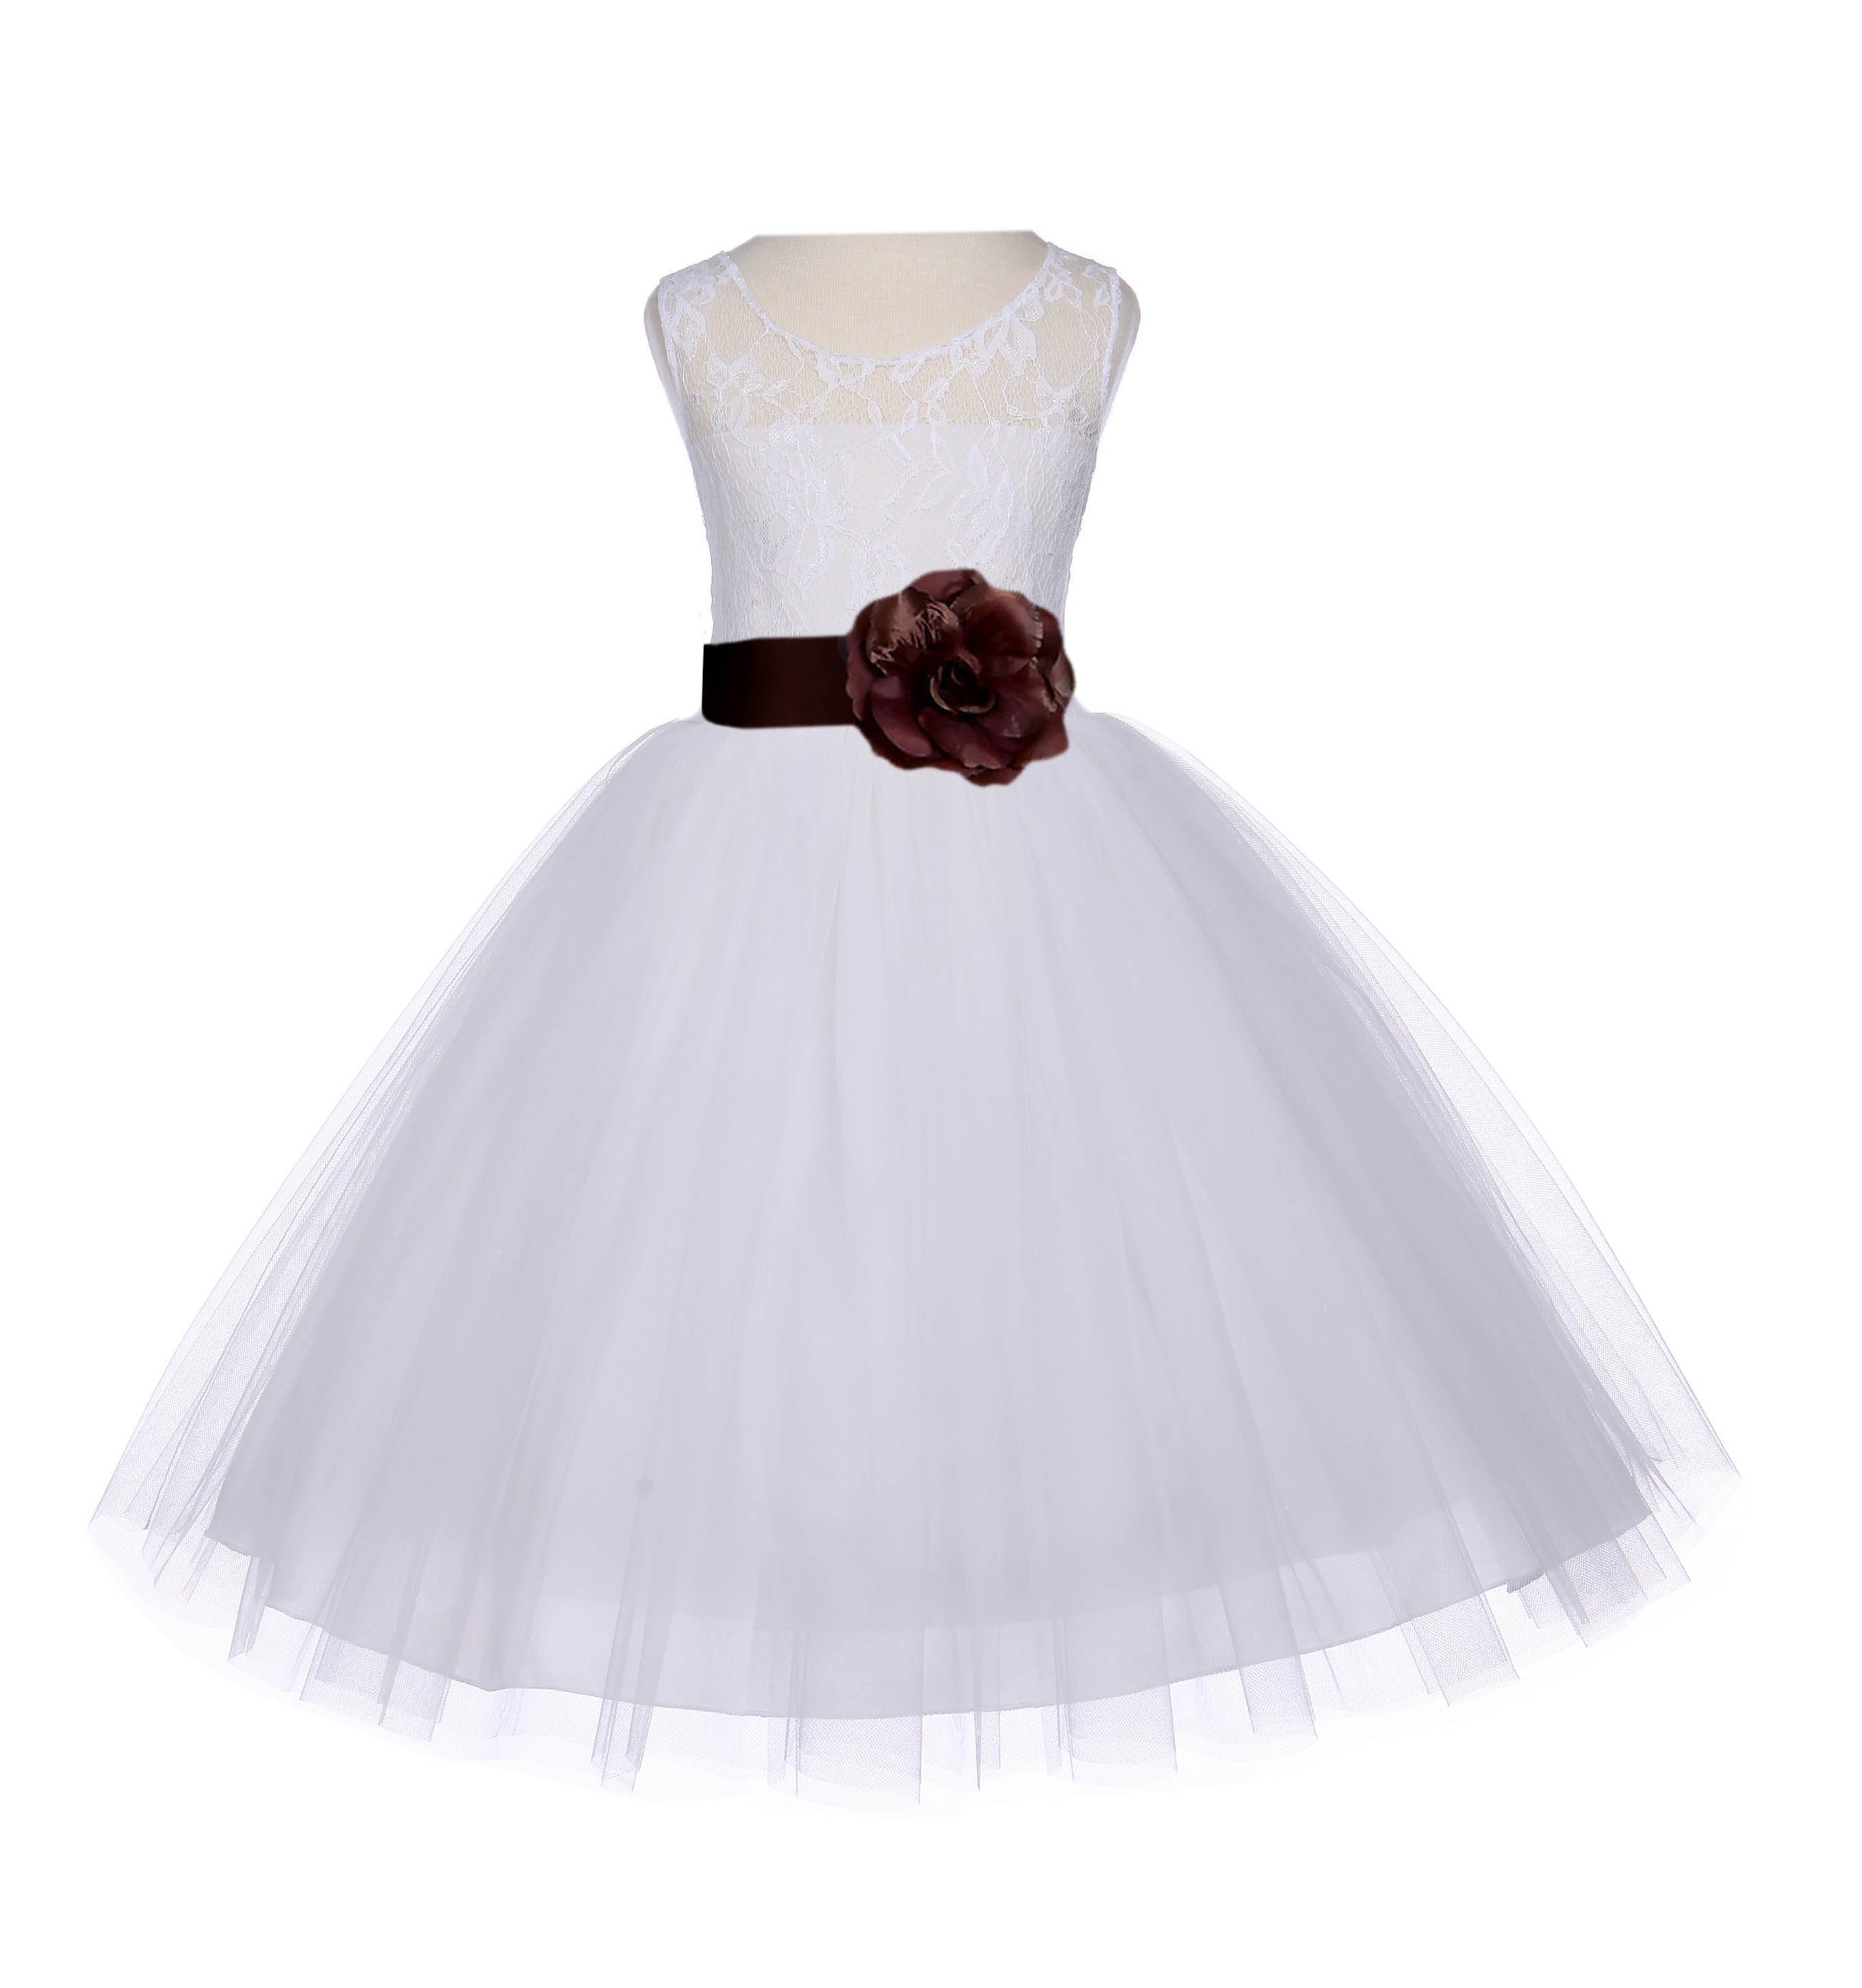 Ivory/Brown Floral Lace Bodice Tulle Flower Girl Dress Bridesmaid 153S